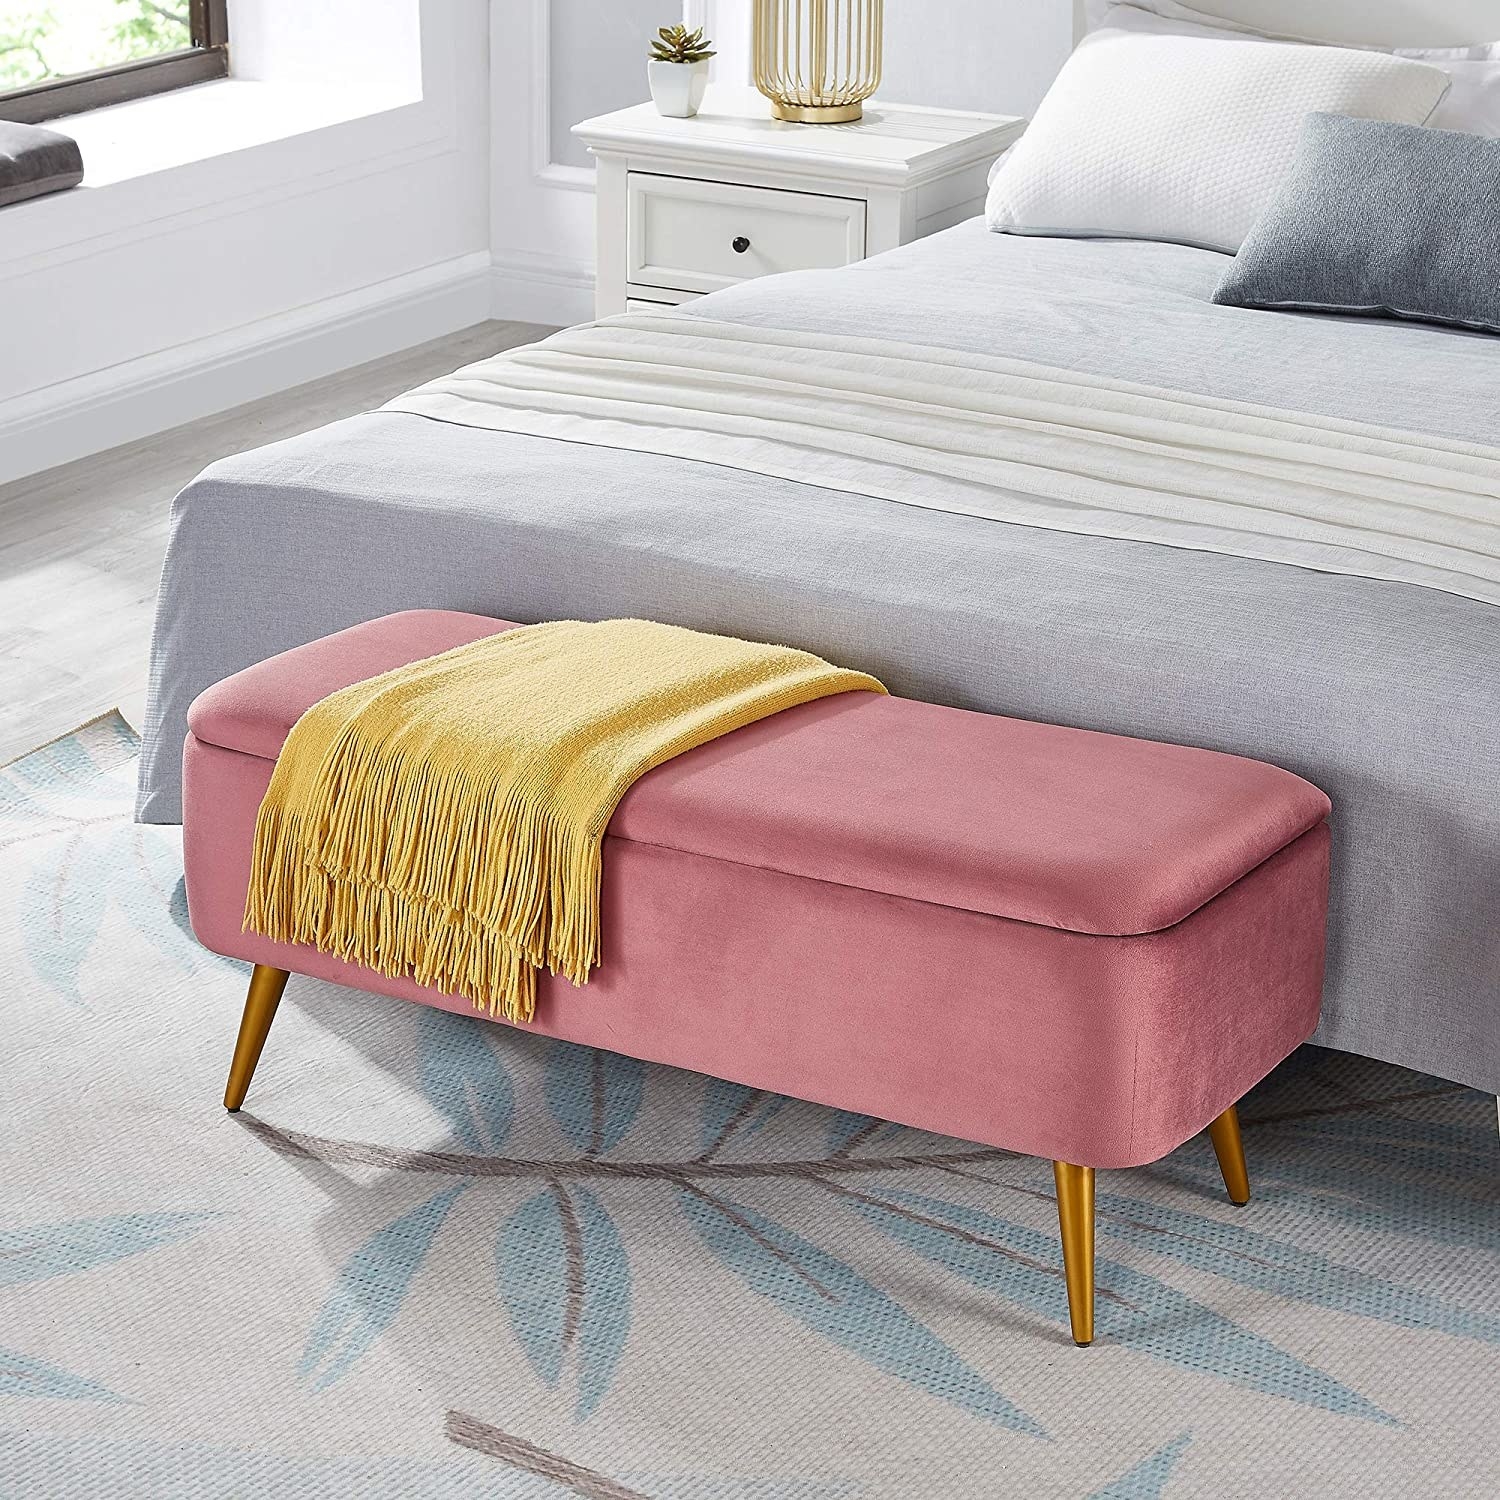 The storage bench at the foot of a bed with a blanket on it